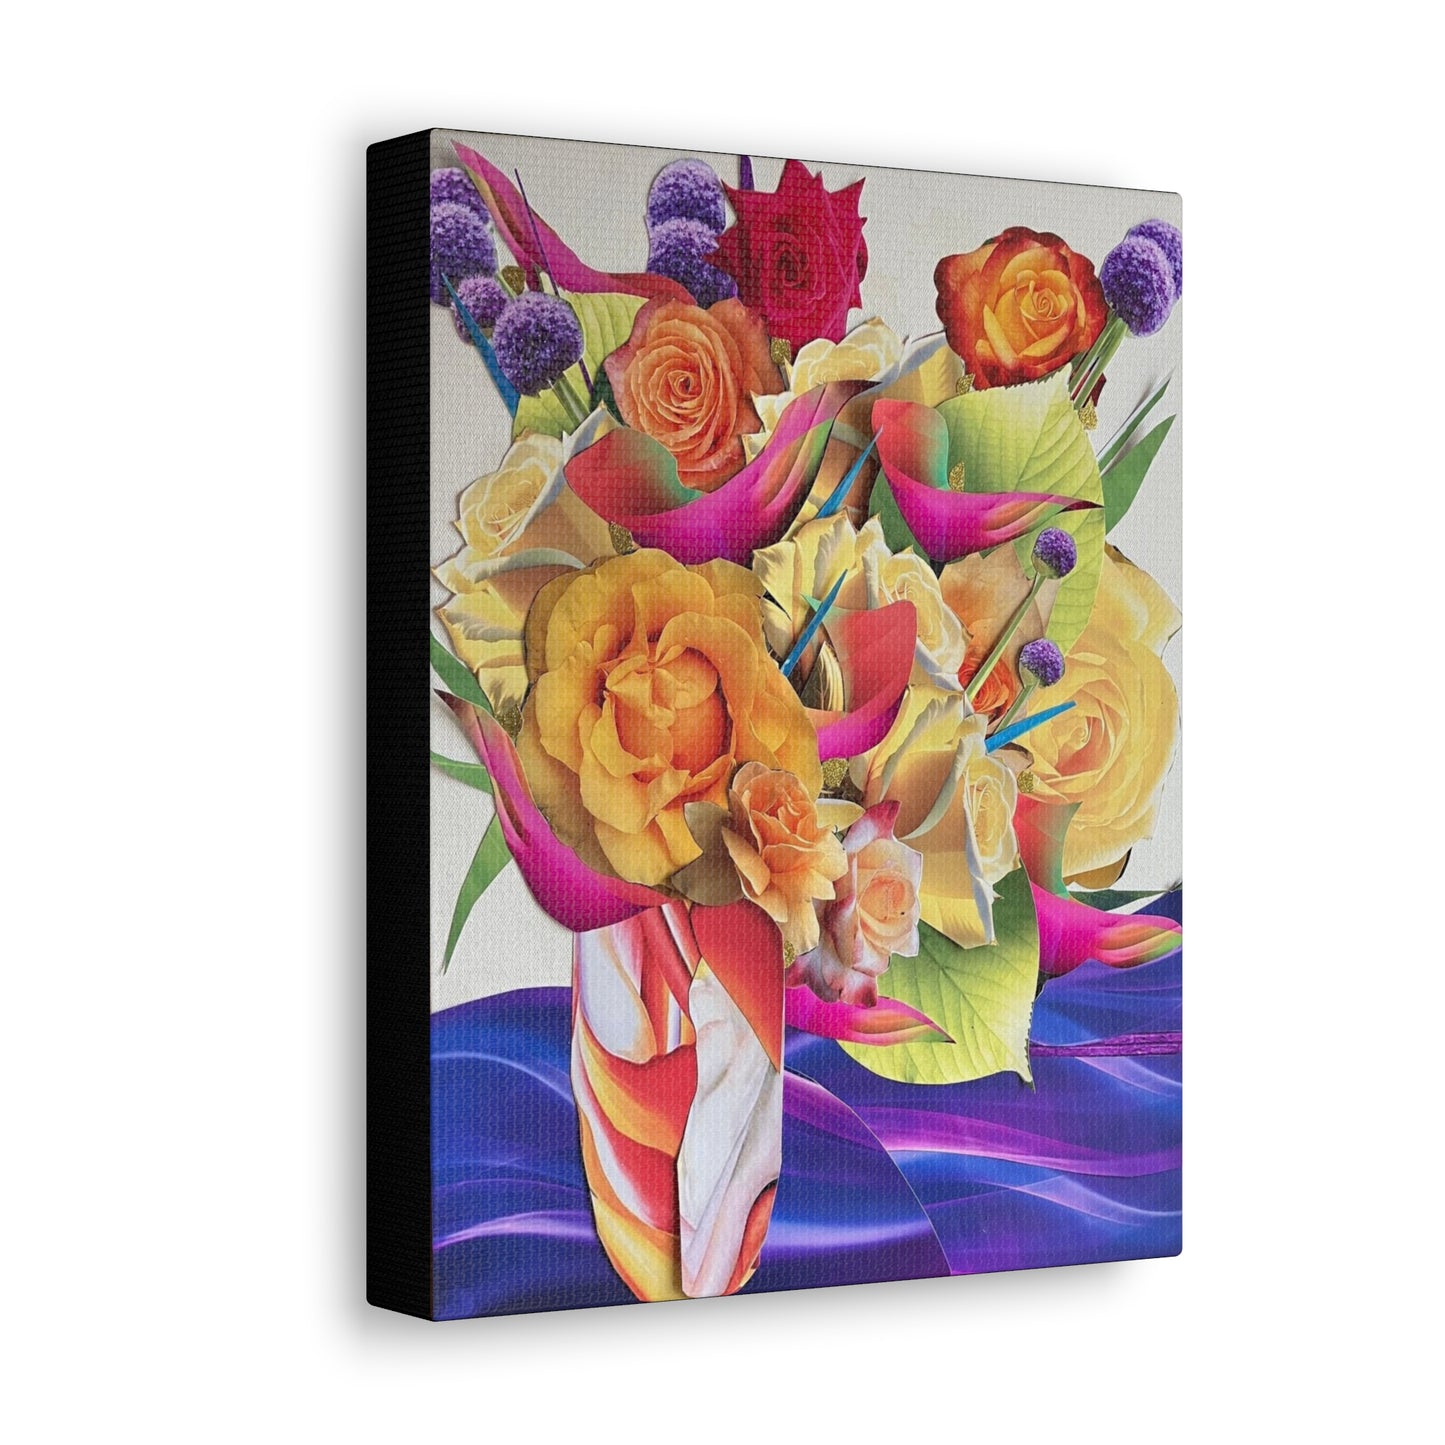 Floral Explosion 8x10" Canvas Gallery Wrap Wall Art